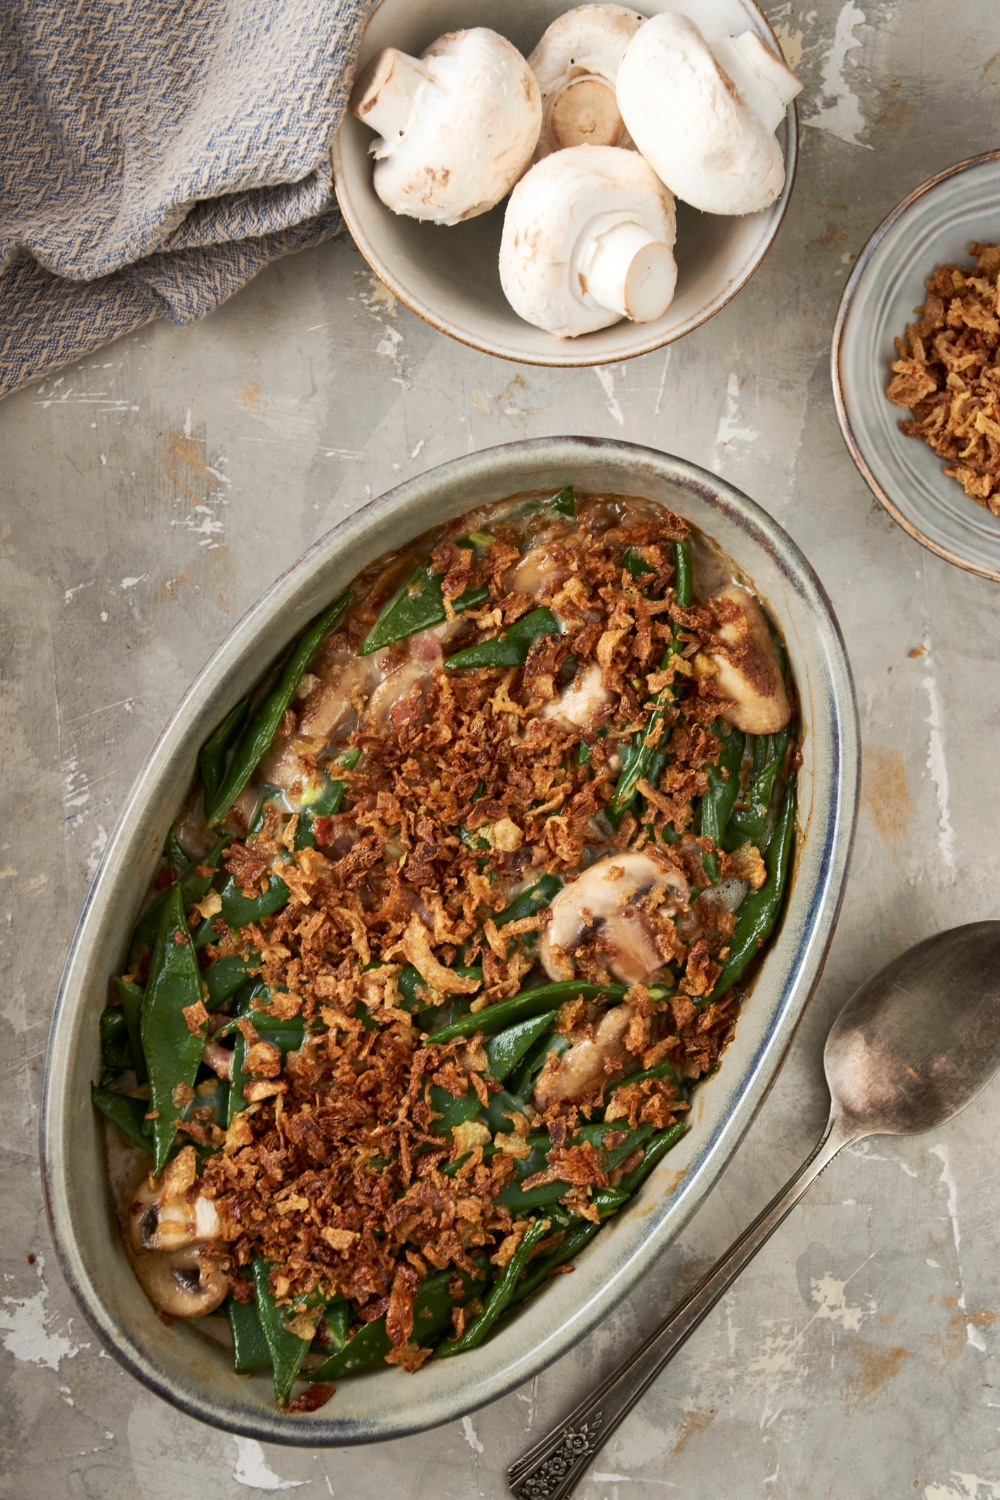 A golden brown dish of green bean casserole sits on a gray counter. A bowl full of white mushrooms sits nearby.